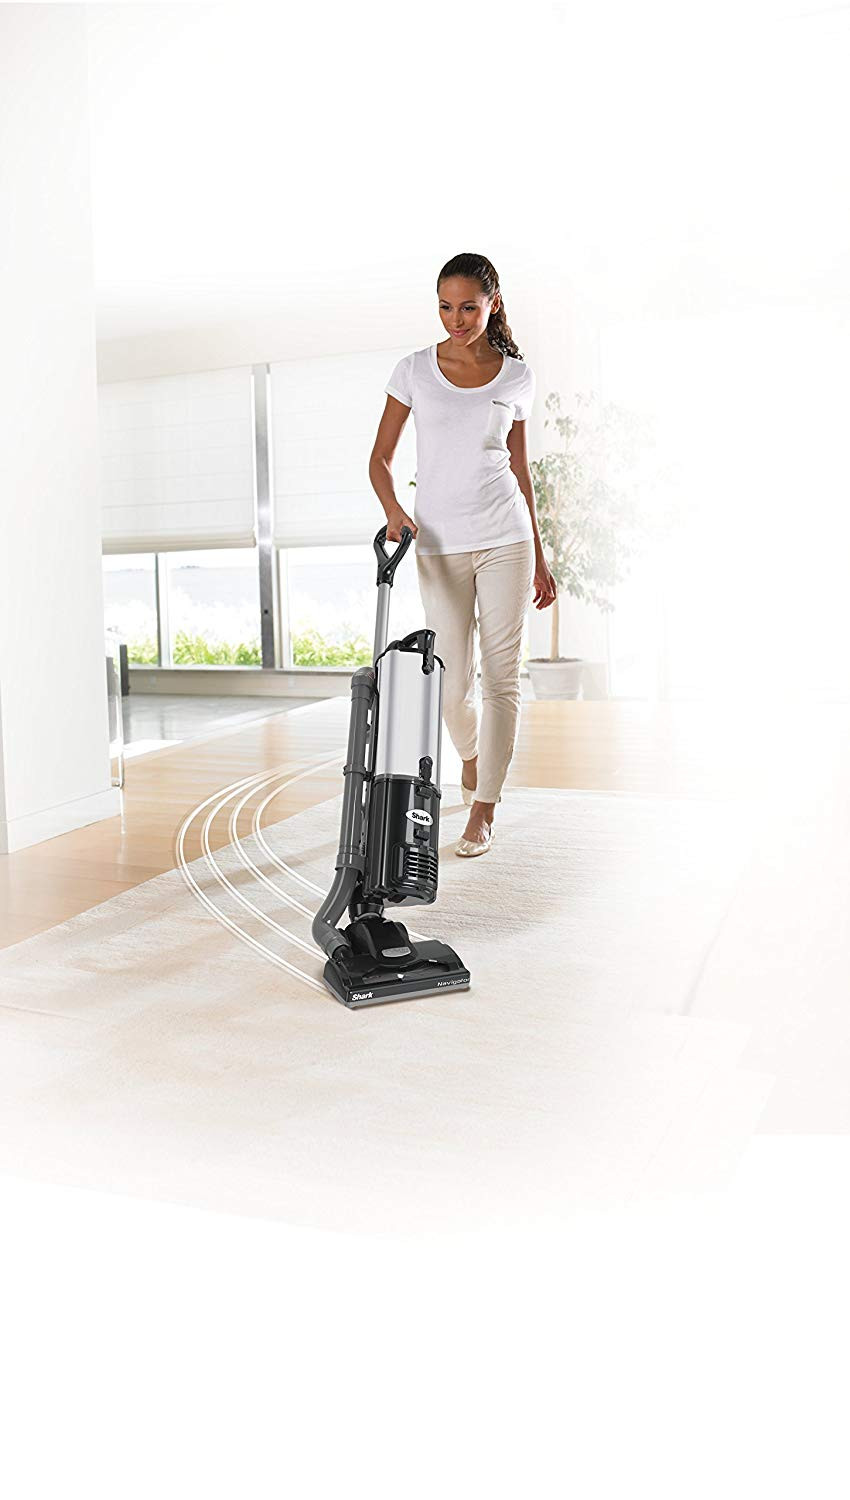 shark hardwood floor cleaner of amazon com shark navigator upright corded bagless vacuum for amazon com shark navigator upright corded bagless vacuum lightweight large capacity for carpet and hard floor cleaning with swivel steering nv27gr